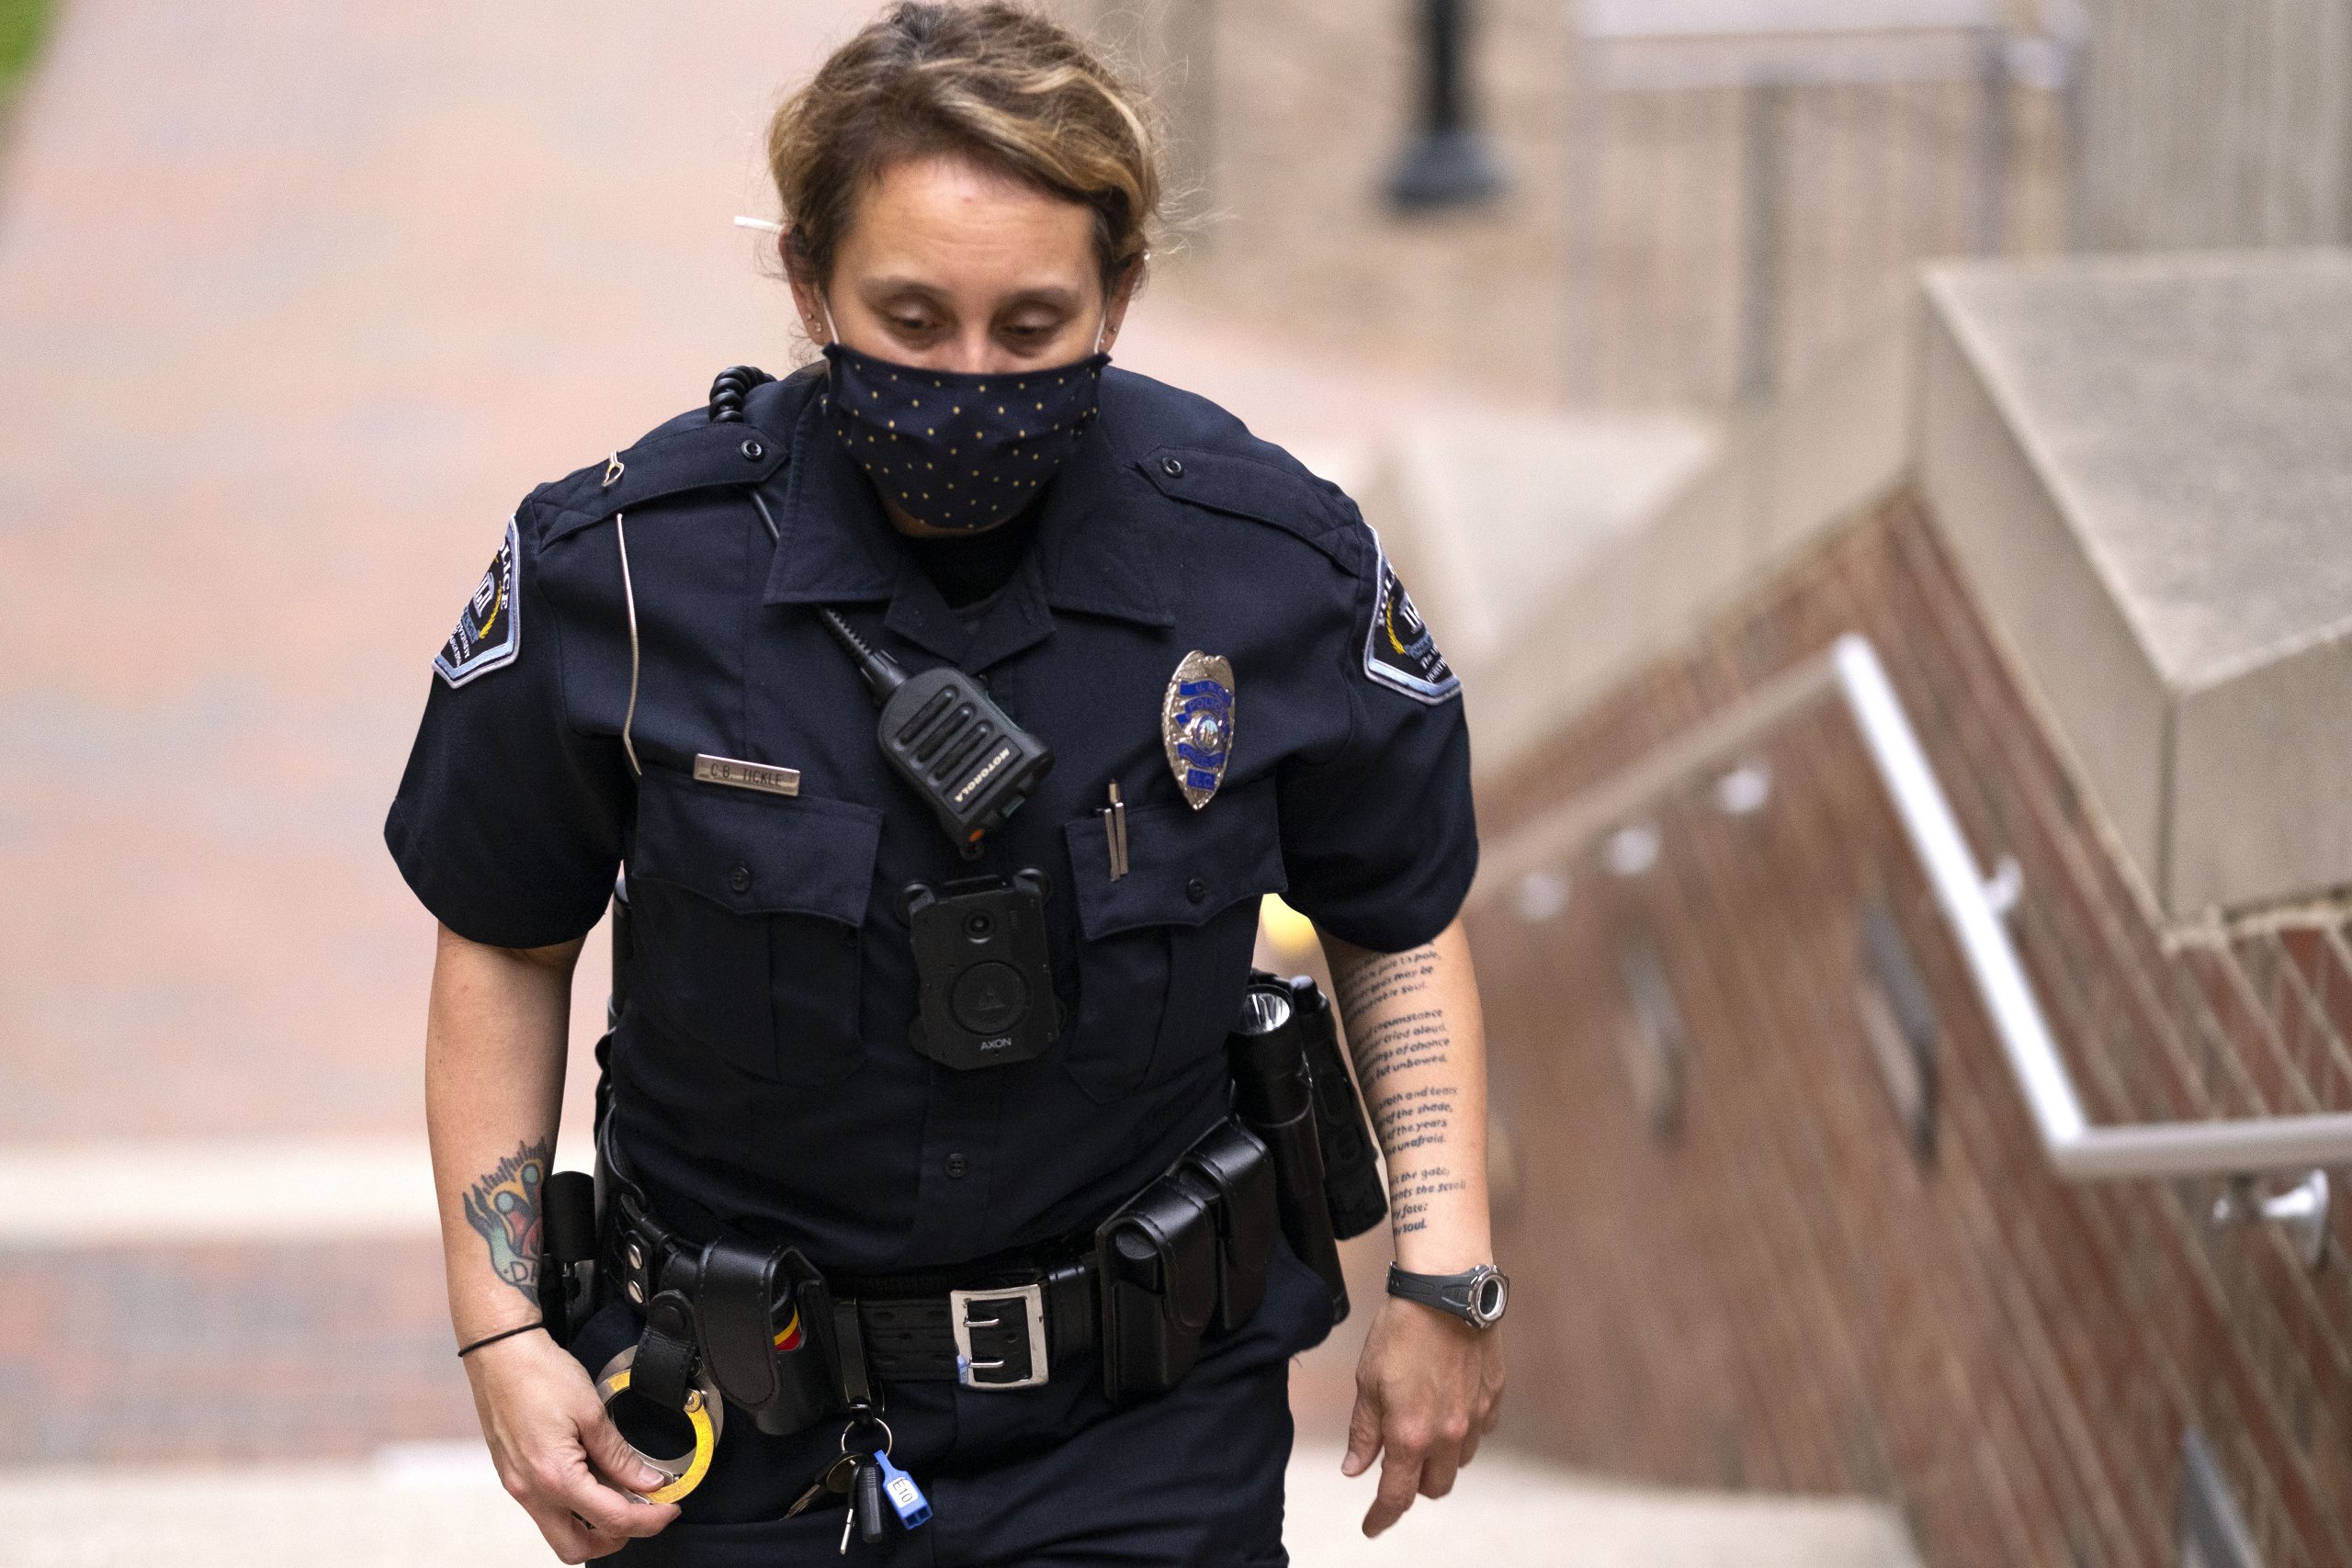 Female officer wearing a Covid mask walking up steps outdoors.